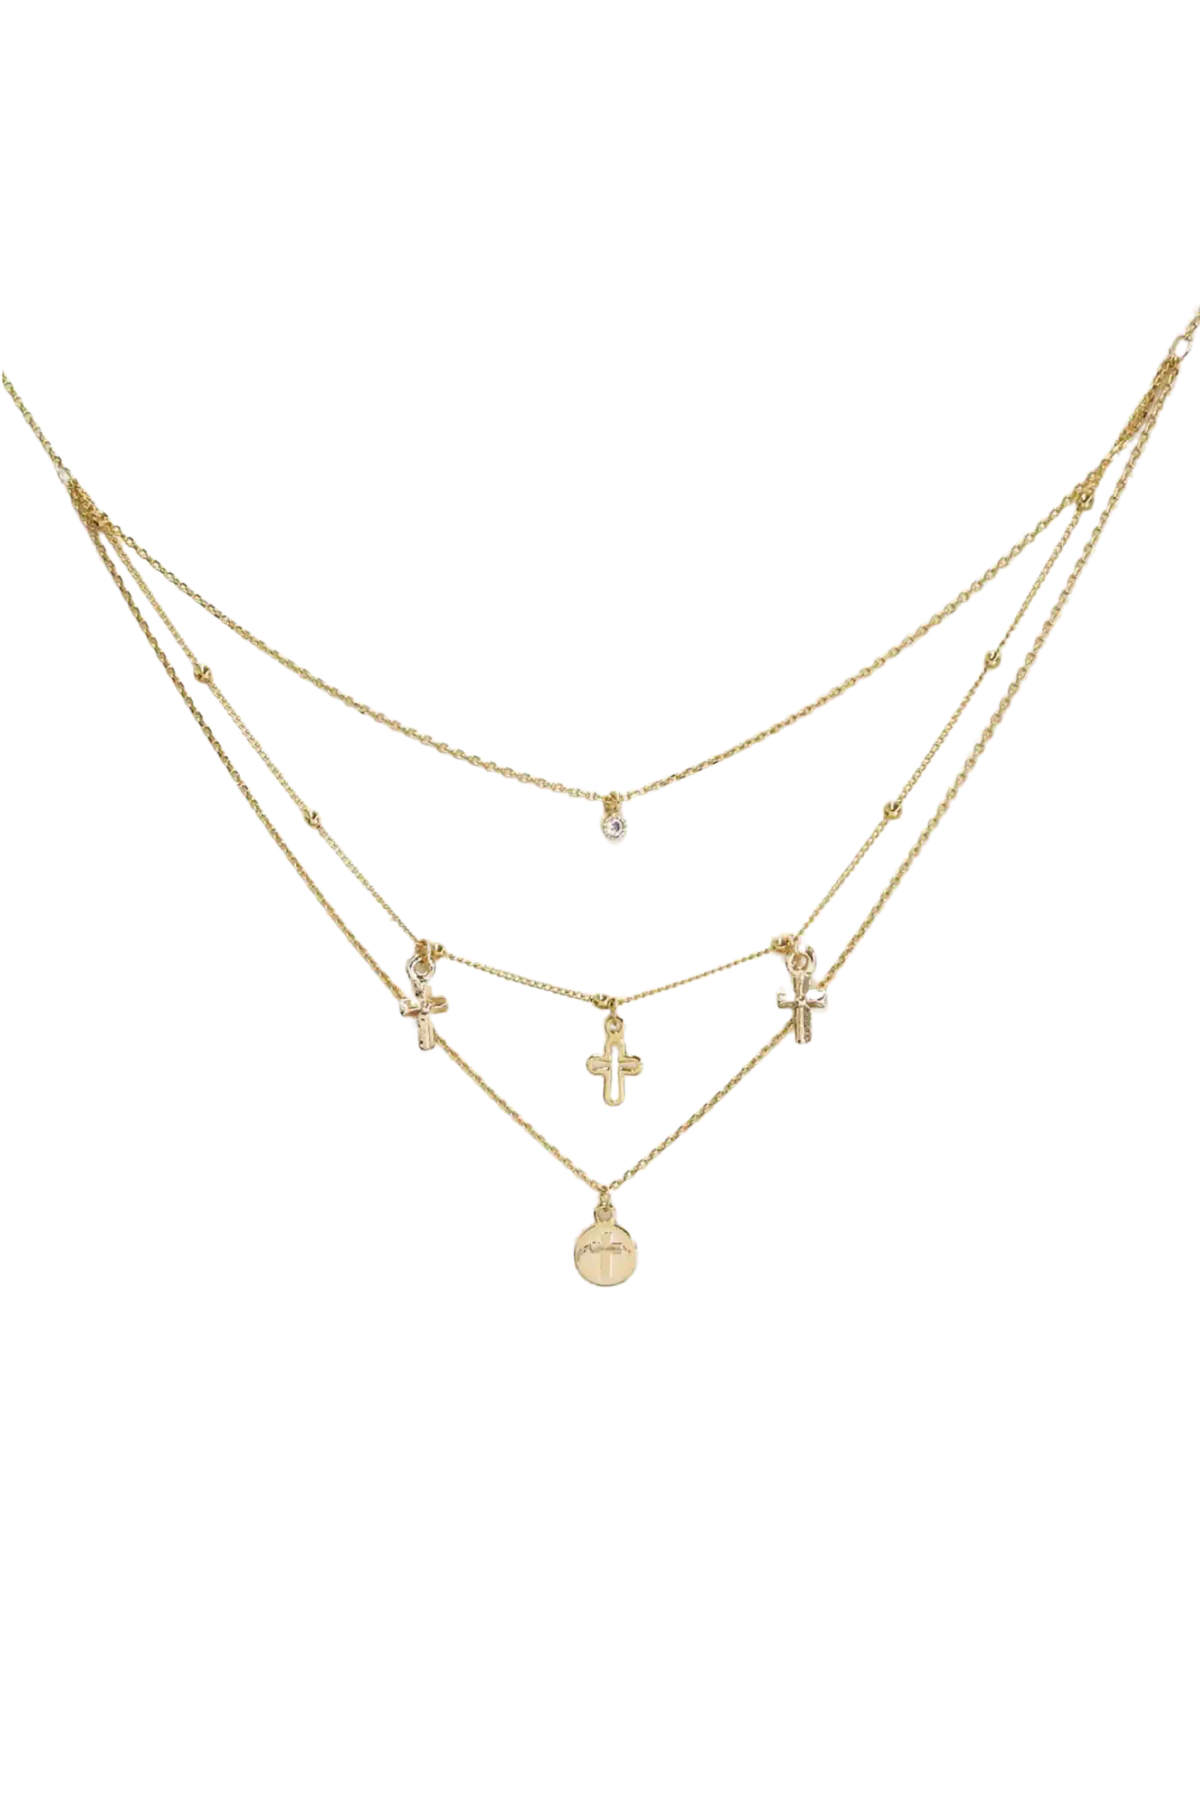 Pray It Forward 18K Gold Plated Layered Cross Necklace By Ettika